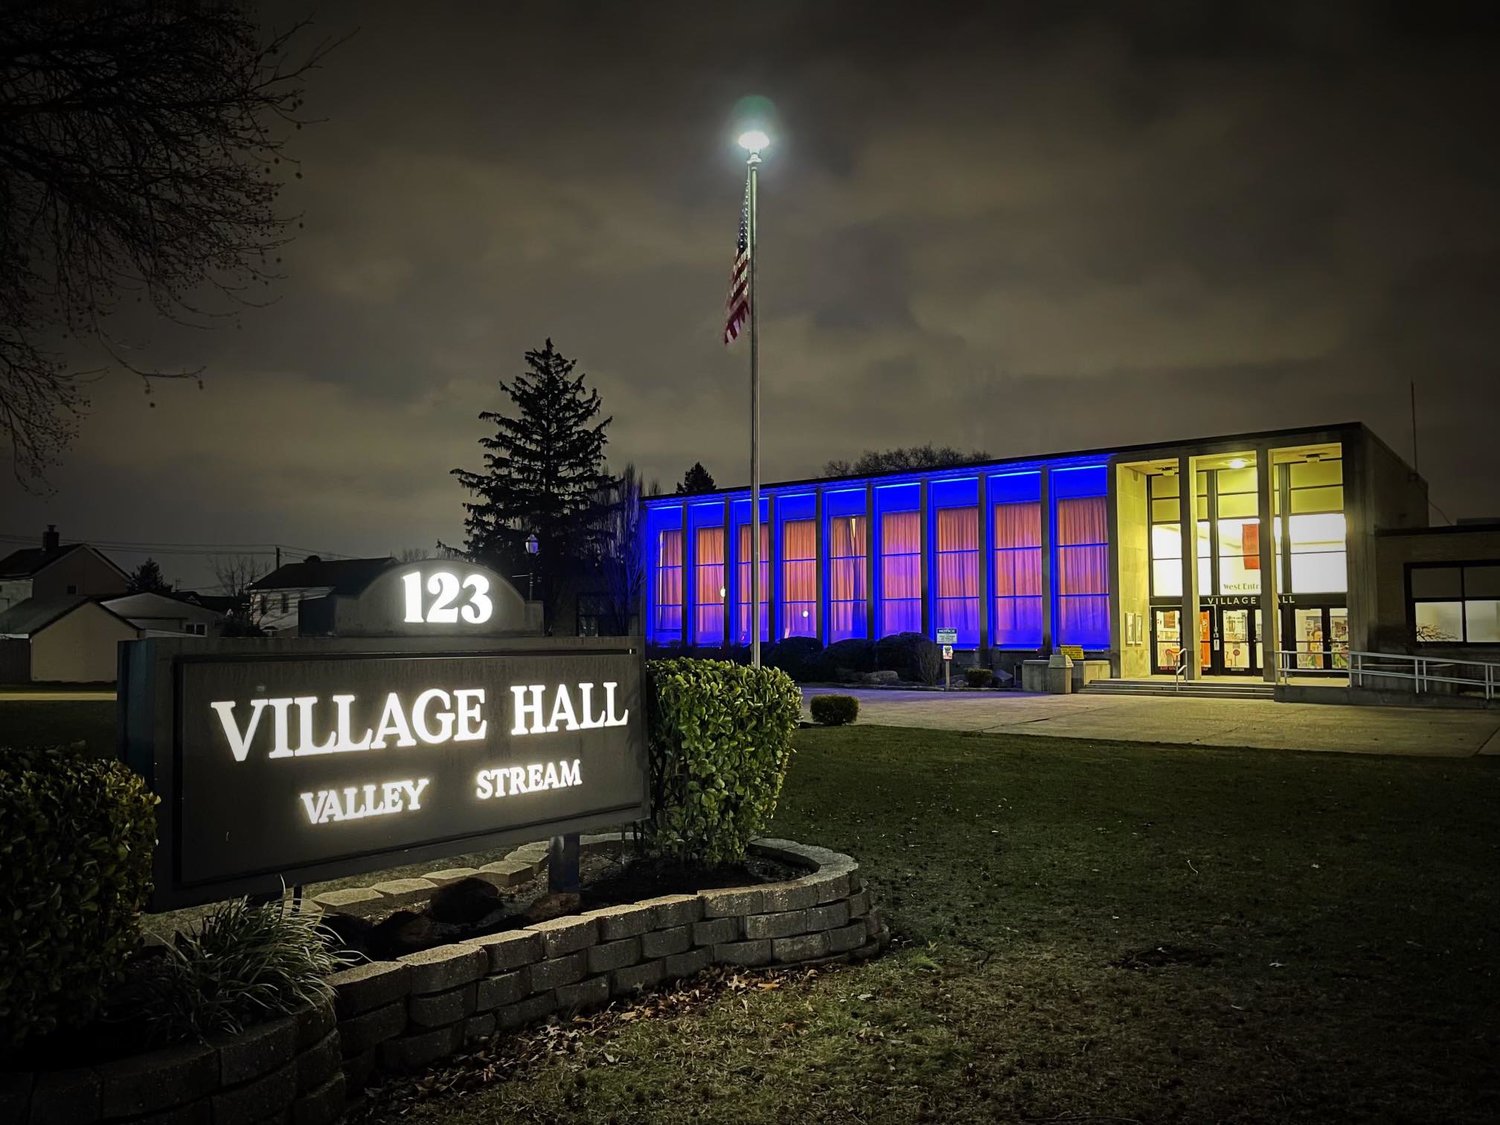 After the the recent Harlem shooting that claimed the life of Officer Jason Rivera, the Village of Valley Stream lit up Village Hall blue. Officer Wilbert Mora died later.